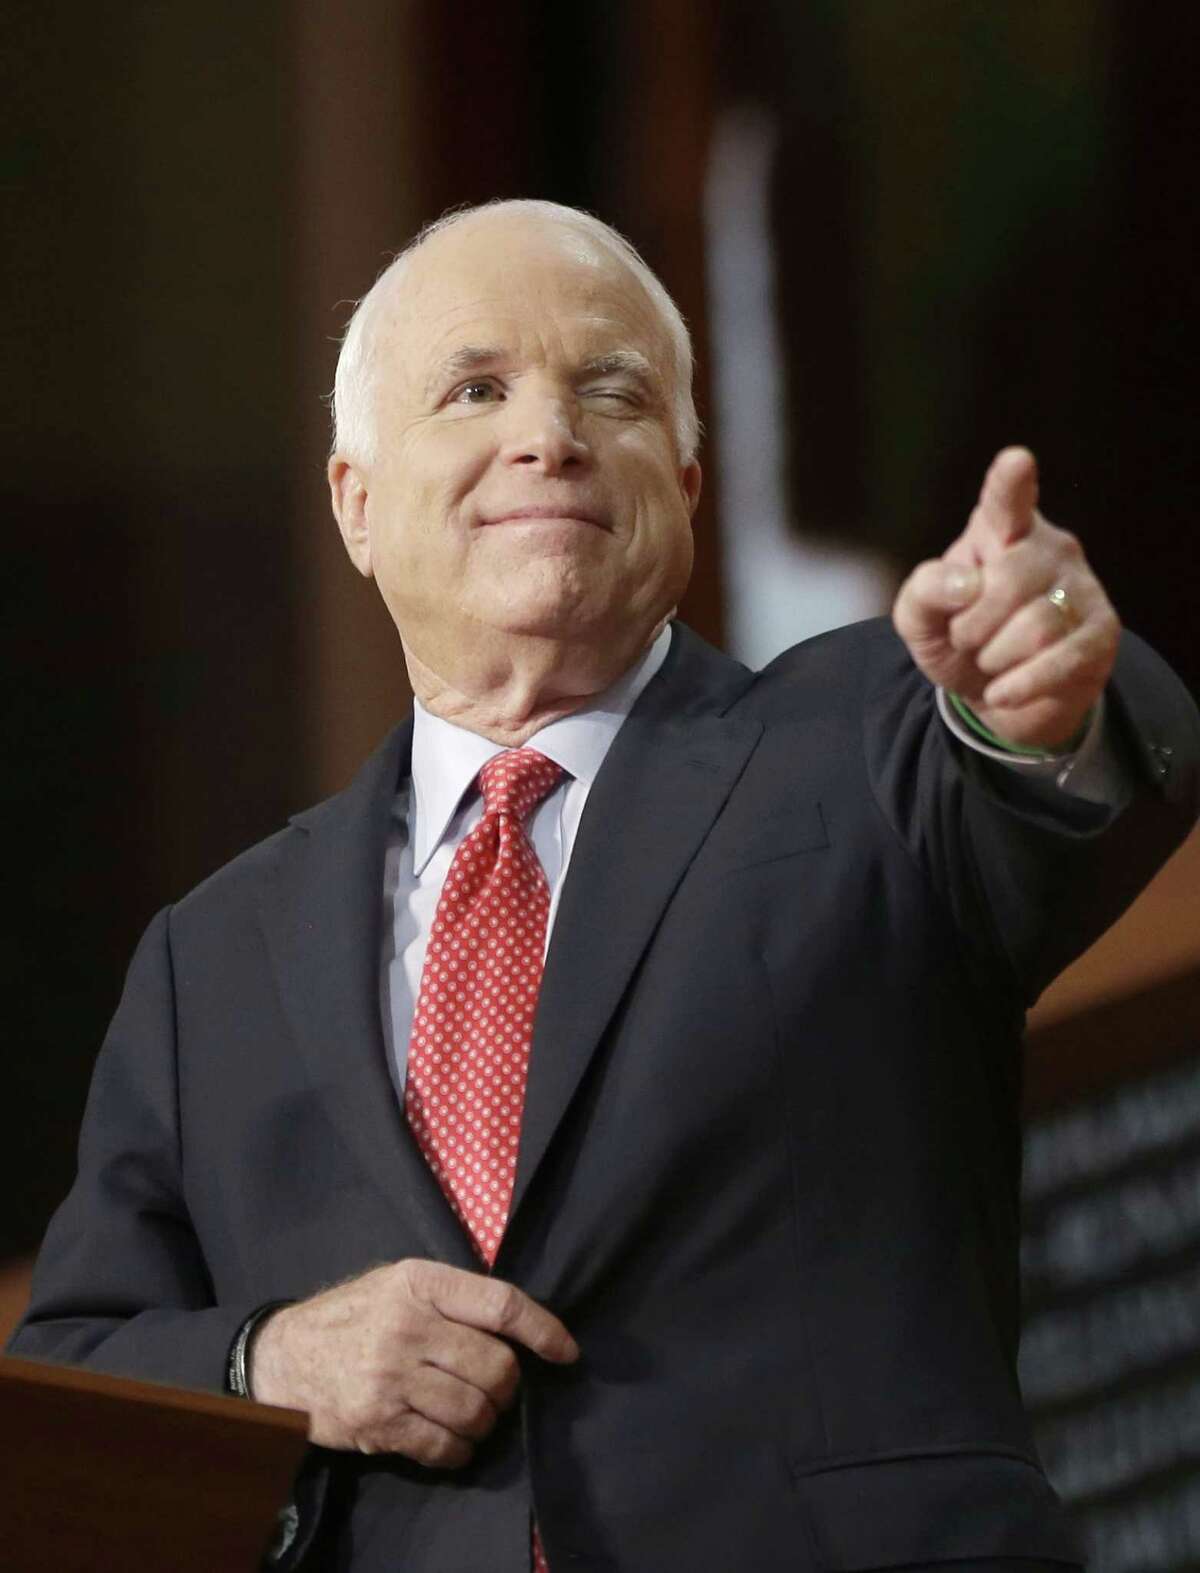 Arizona Senator John McCain winks after addressing the Republican National Convention in Tampa, Fla., in this August 2012 file photo. McCain is coming to Cromwell on Jan. 30.